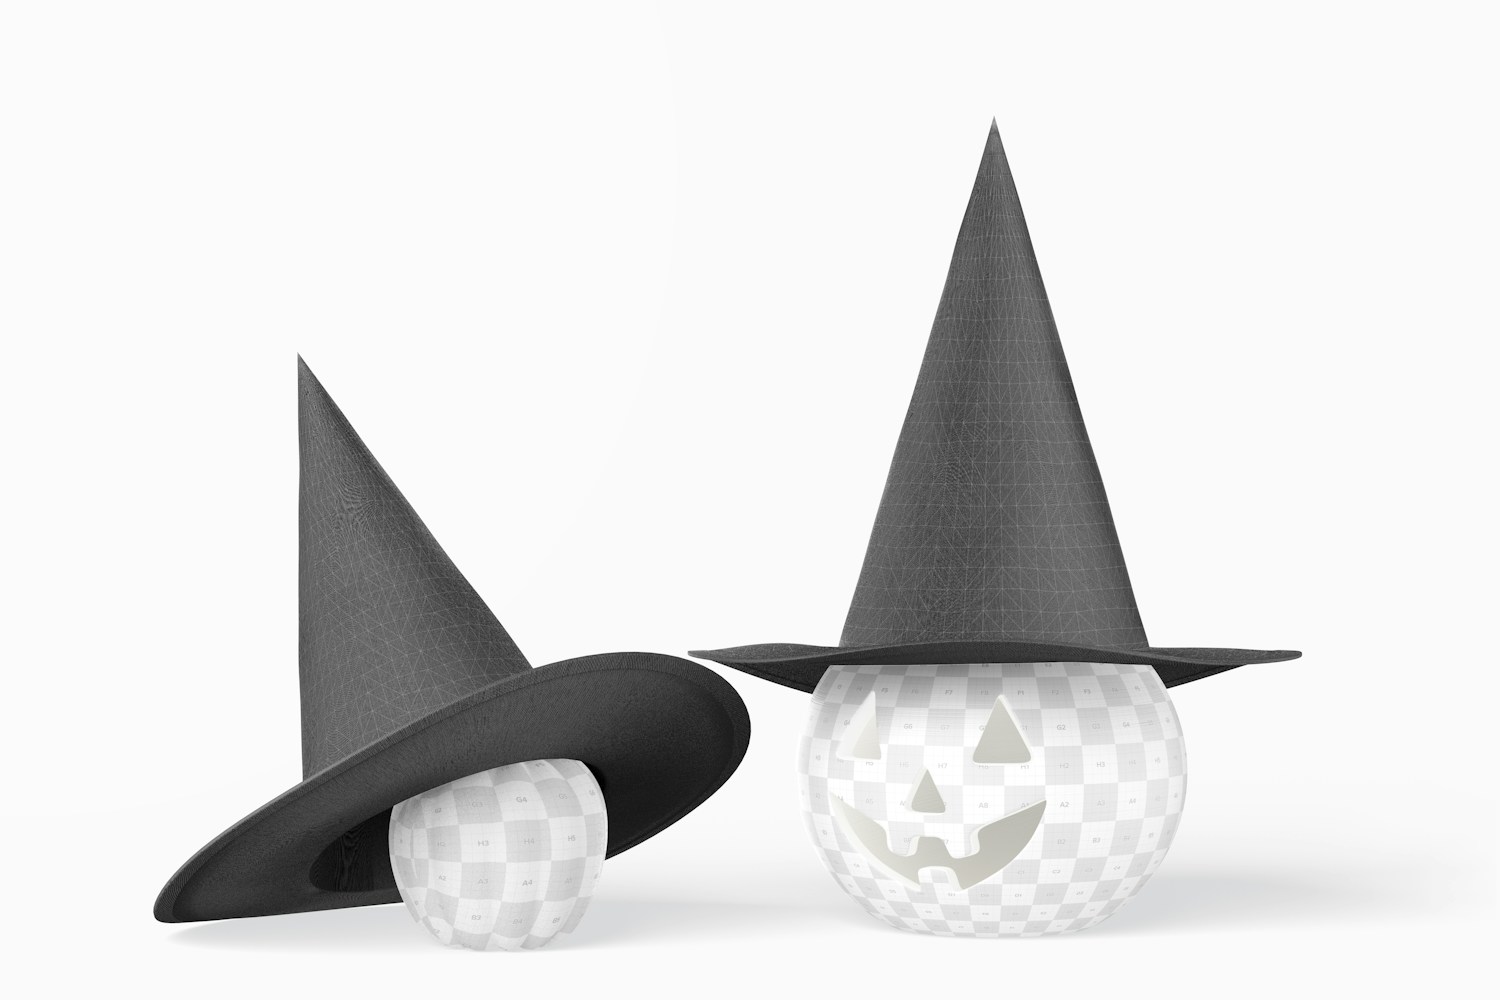 Witch Hats with Pumpkins Mockup